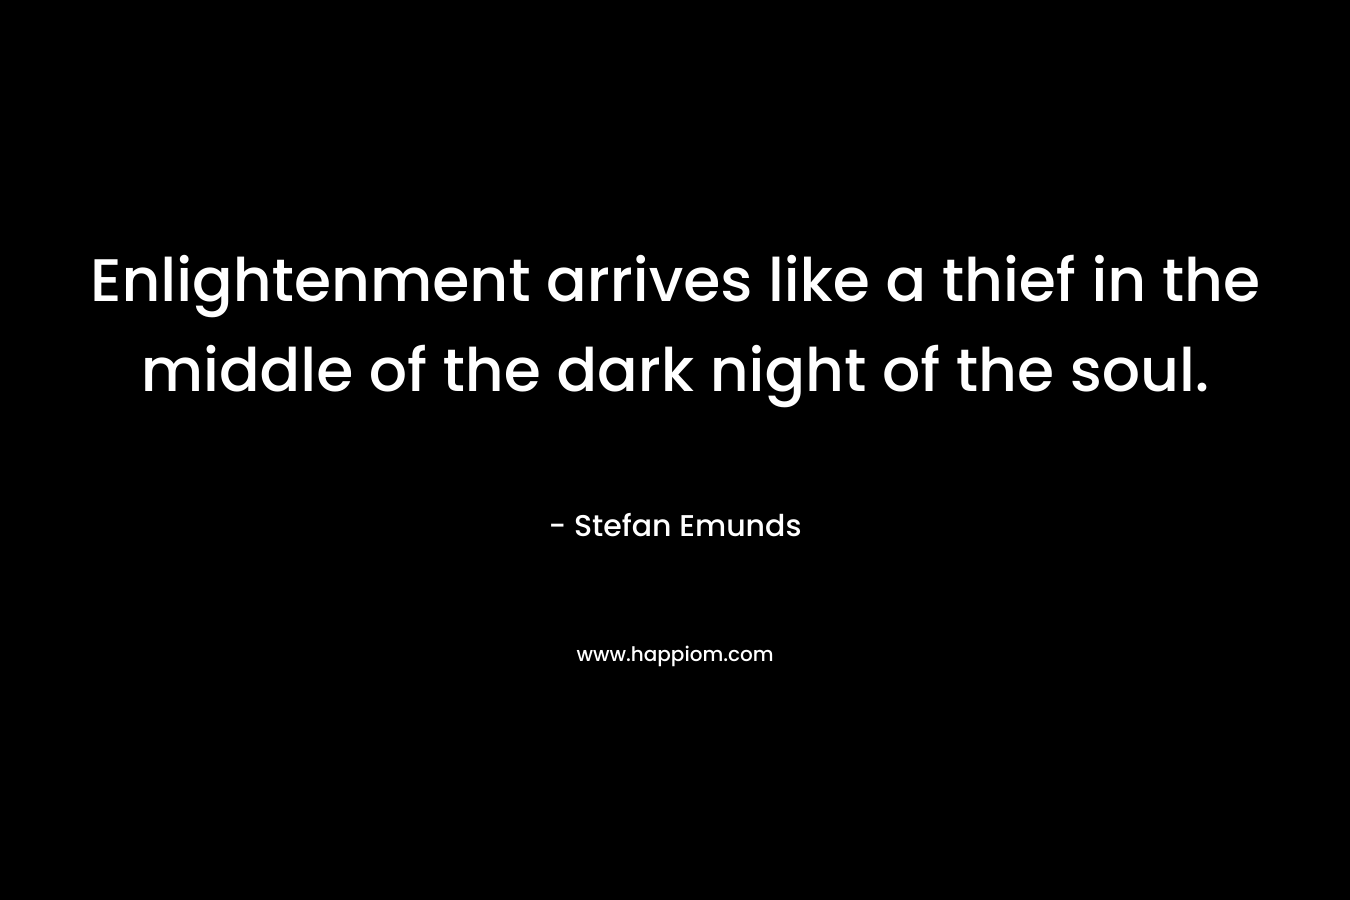 Enlightenment arrives like a thief in the middle of the dark night of the soul.